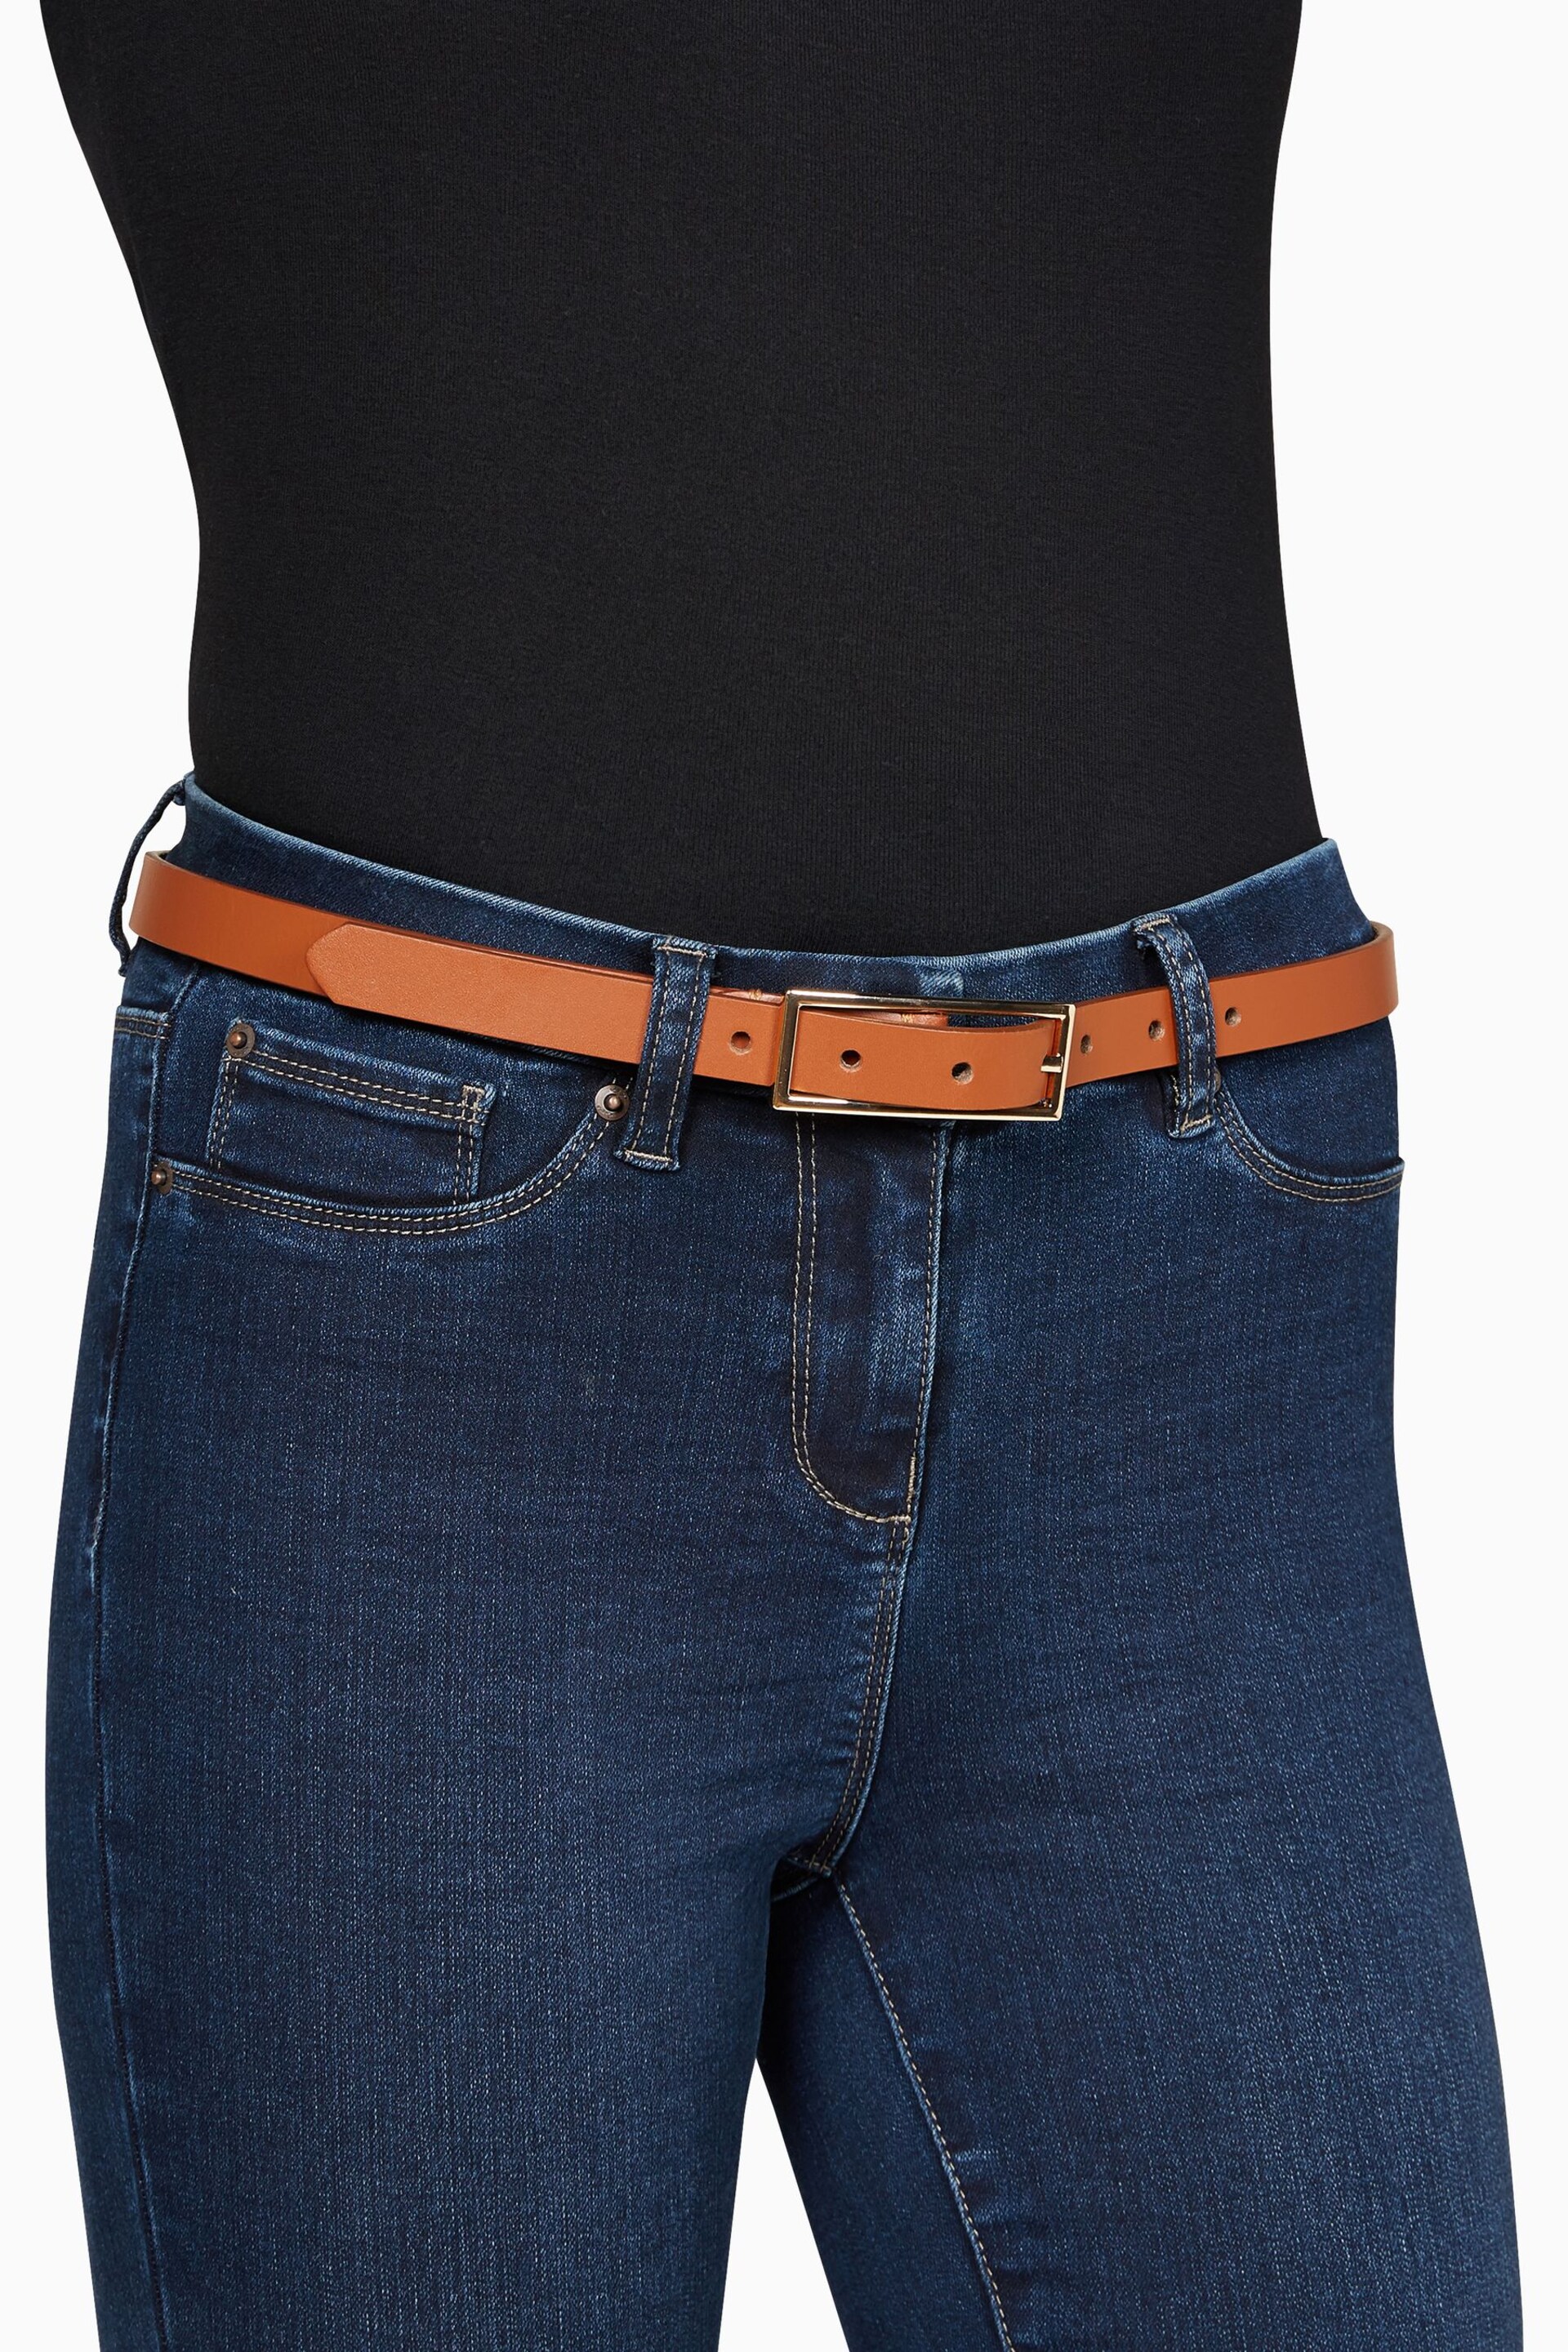 Tan/Gold Leather Reversible Jeans Belt - Image 5 of 6